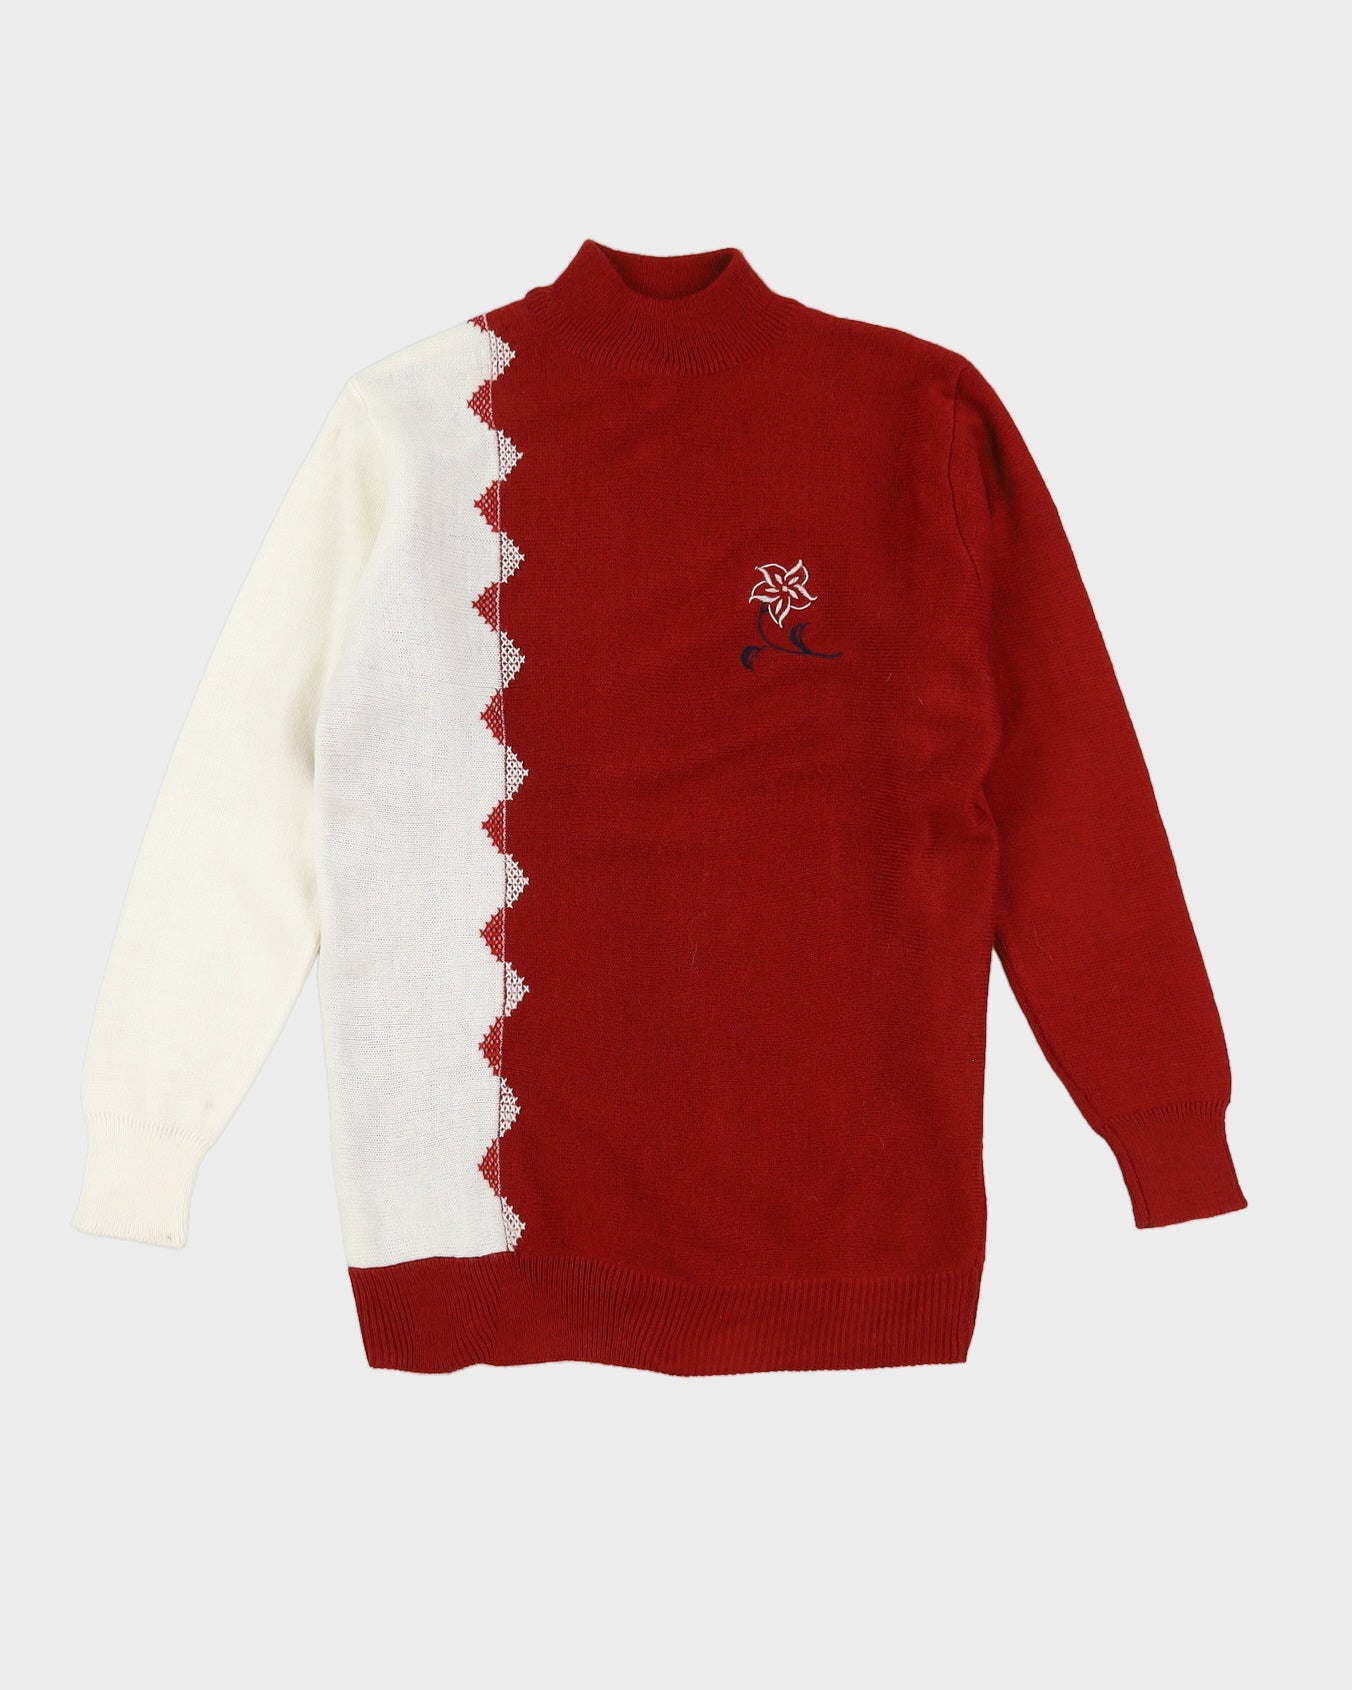 Russet And White Knitted Jumper - S